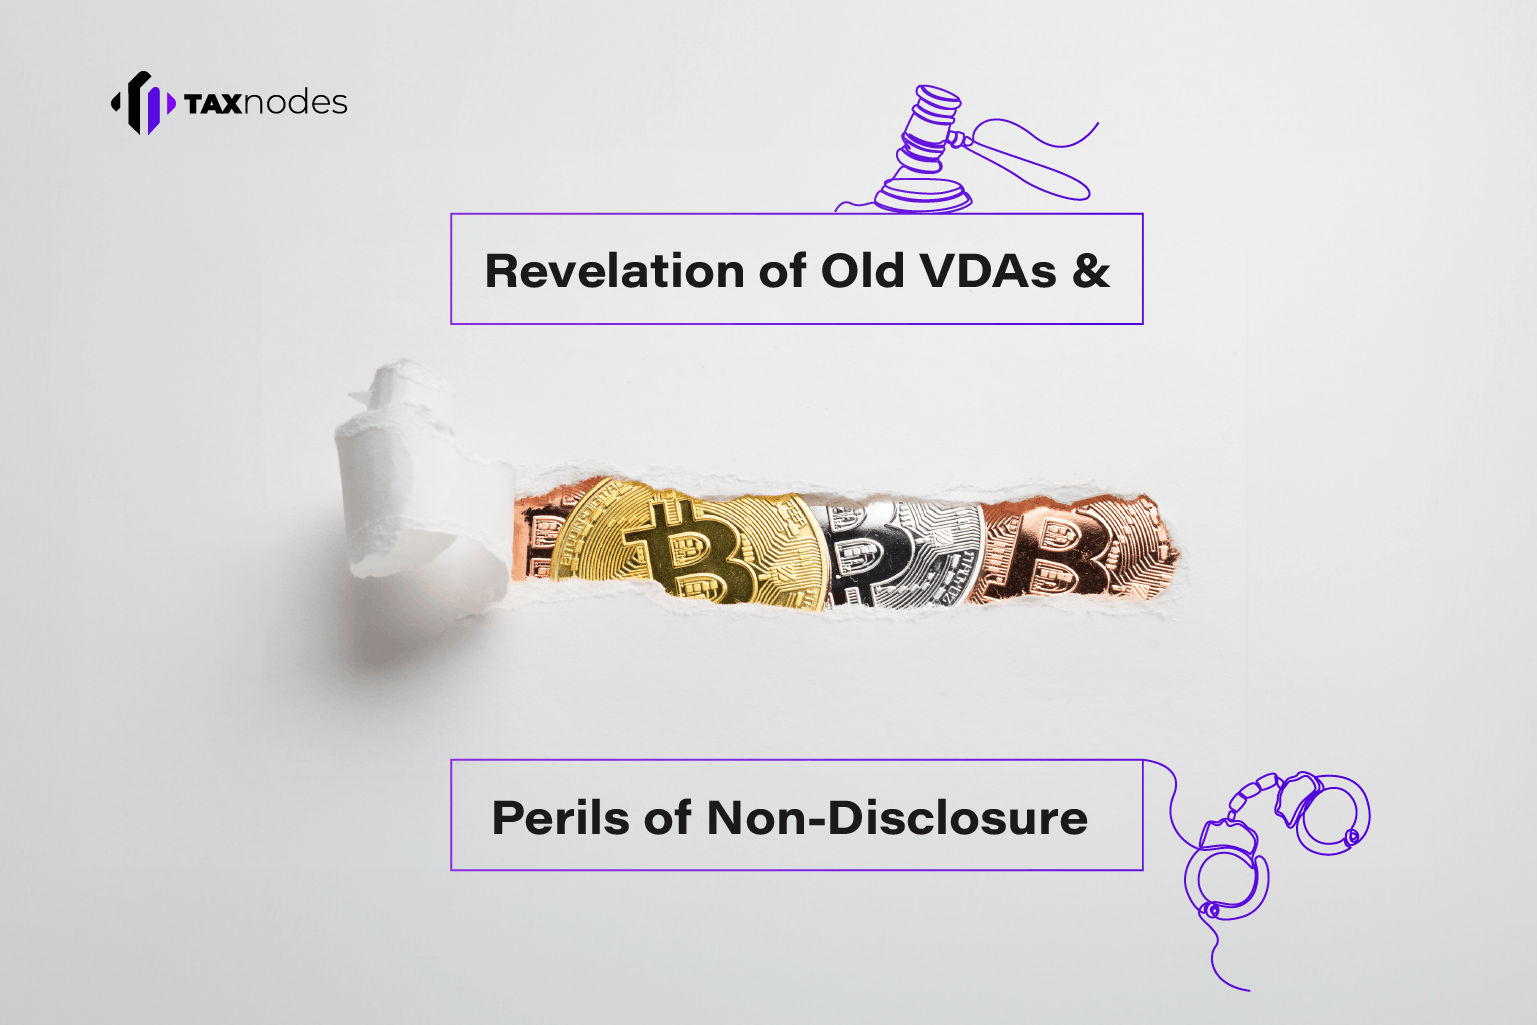 The revelation of old VDAs and perils of non-disclosure